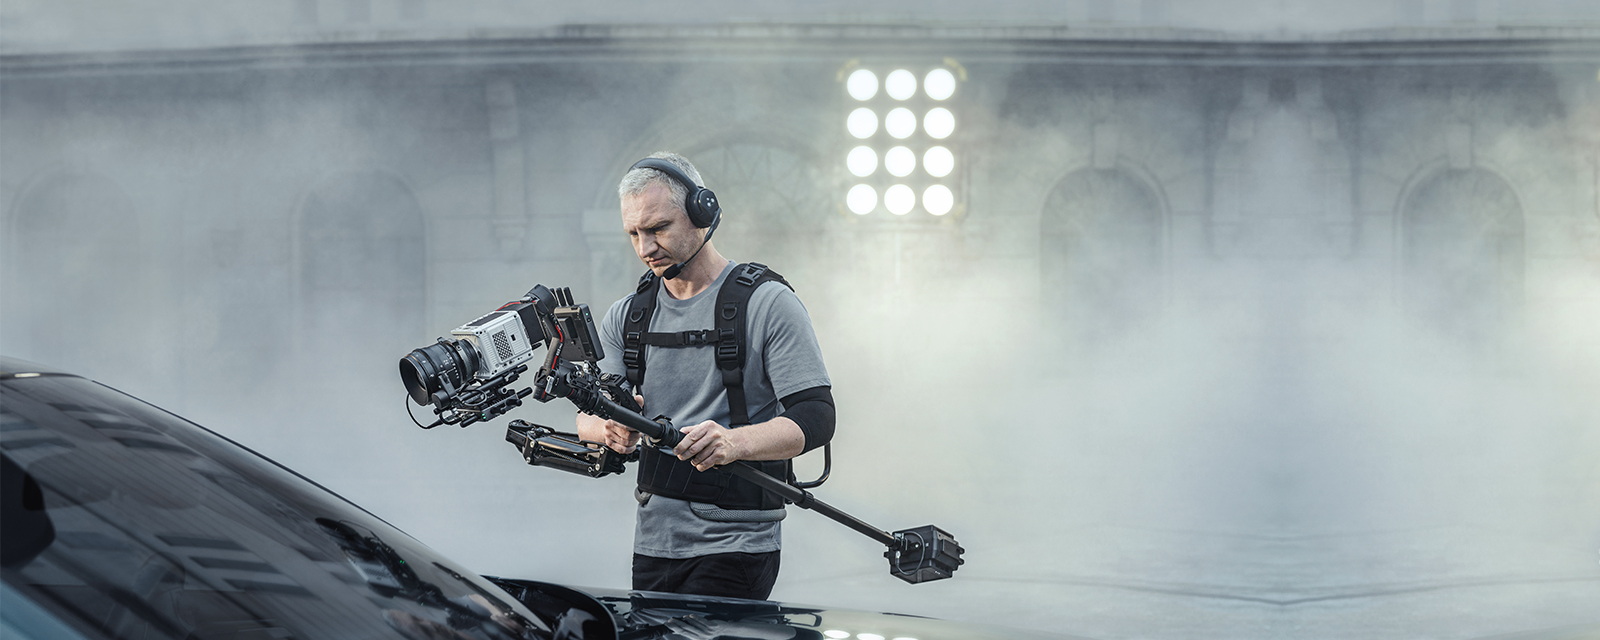 New DJI Ronin Coming Soon: Everything We Know | D1 Lounge